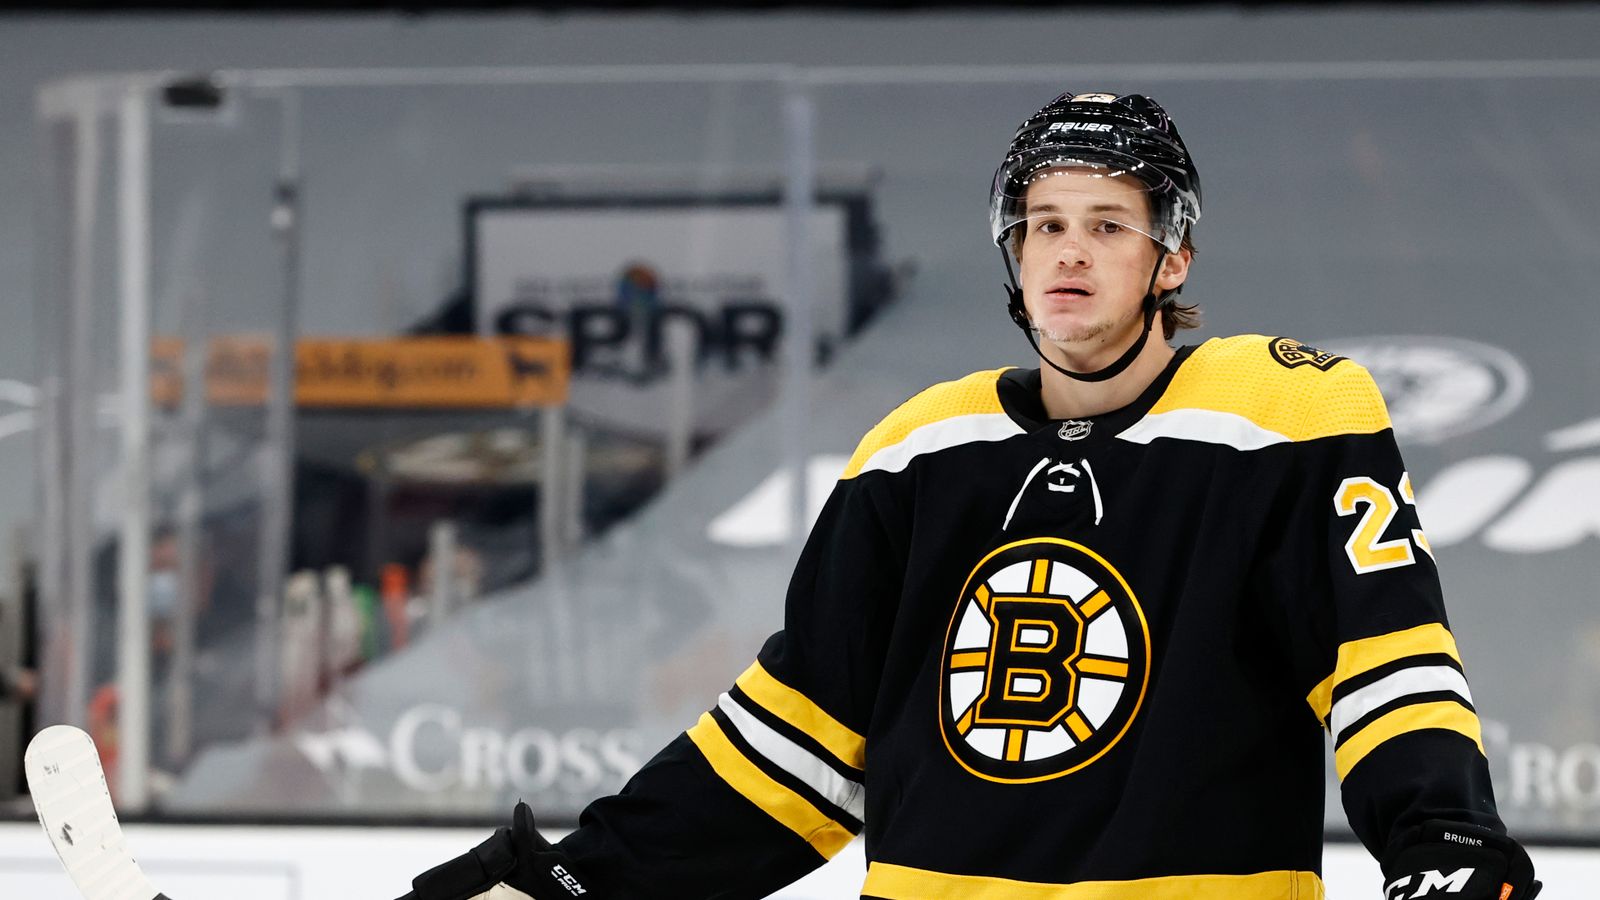 Bruins Announce Roster: Moore Stays, Wagner, Studnicka Cut